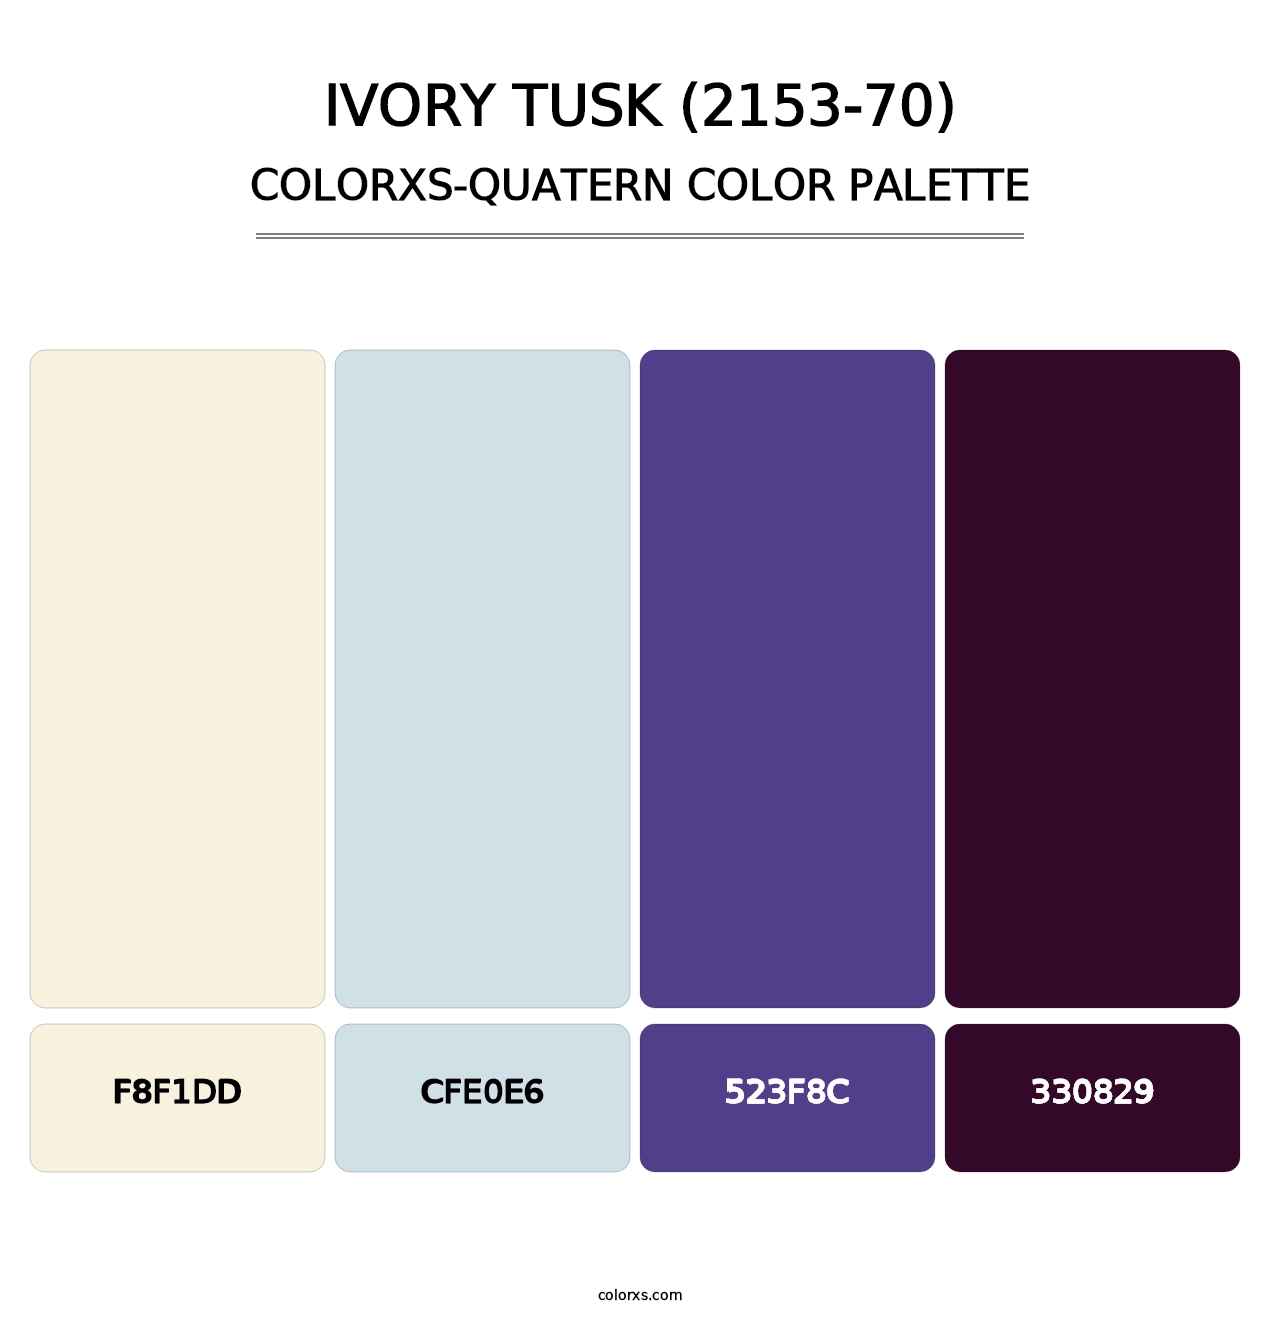 Ivory Tusk (2153-70) - Colorxs Quatern Palette